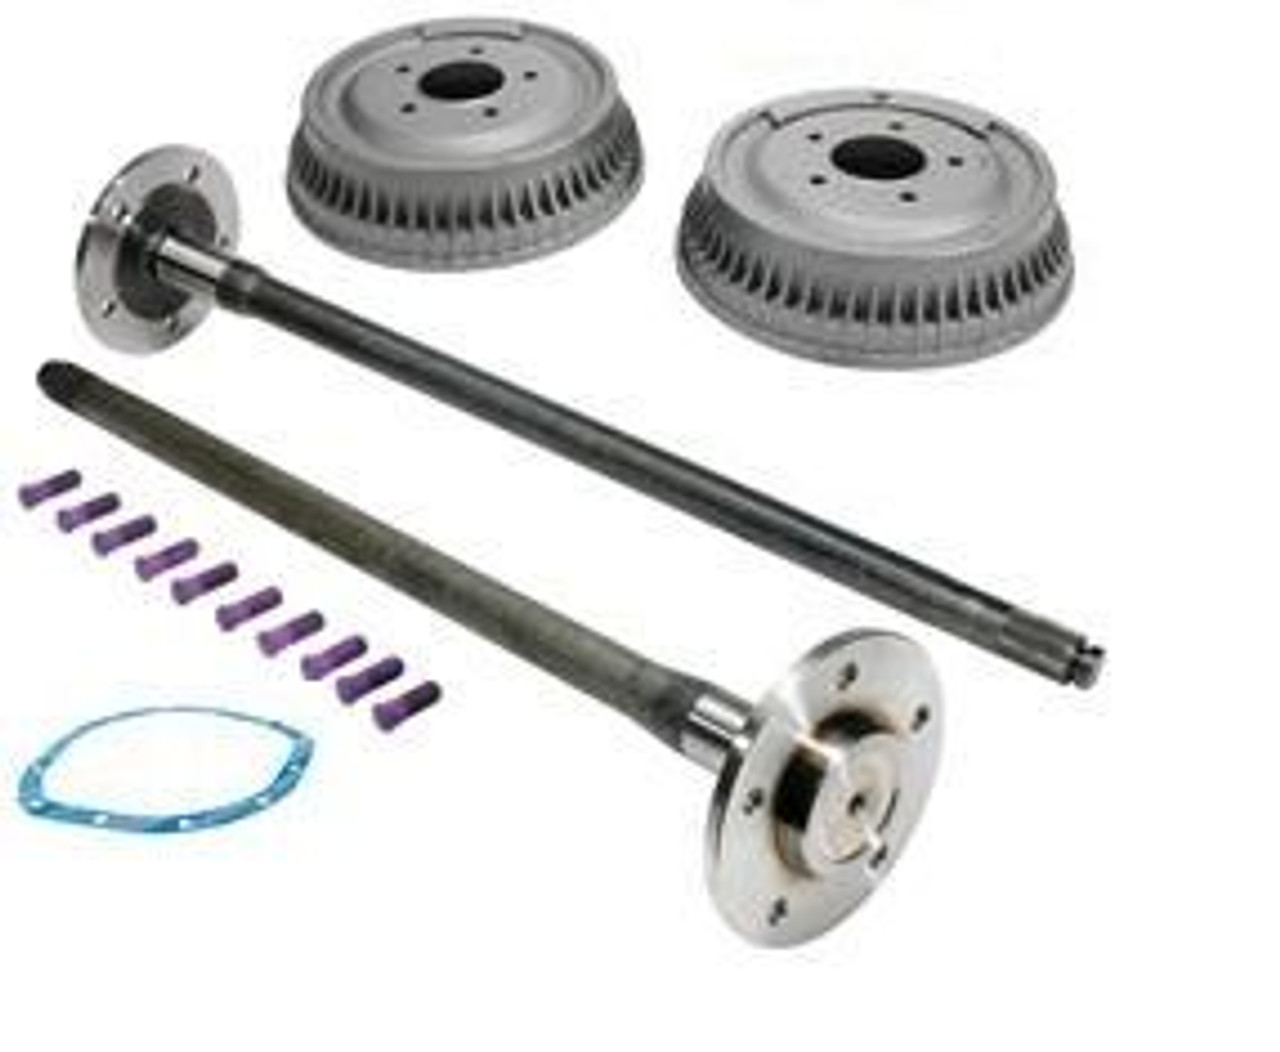 1965-69 Chevy UP 5-Lug Rear Axle Conversion Kit. (axles come pre-drilled with a 5-lug on 5" Chevrolet truck bolt circle .